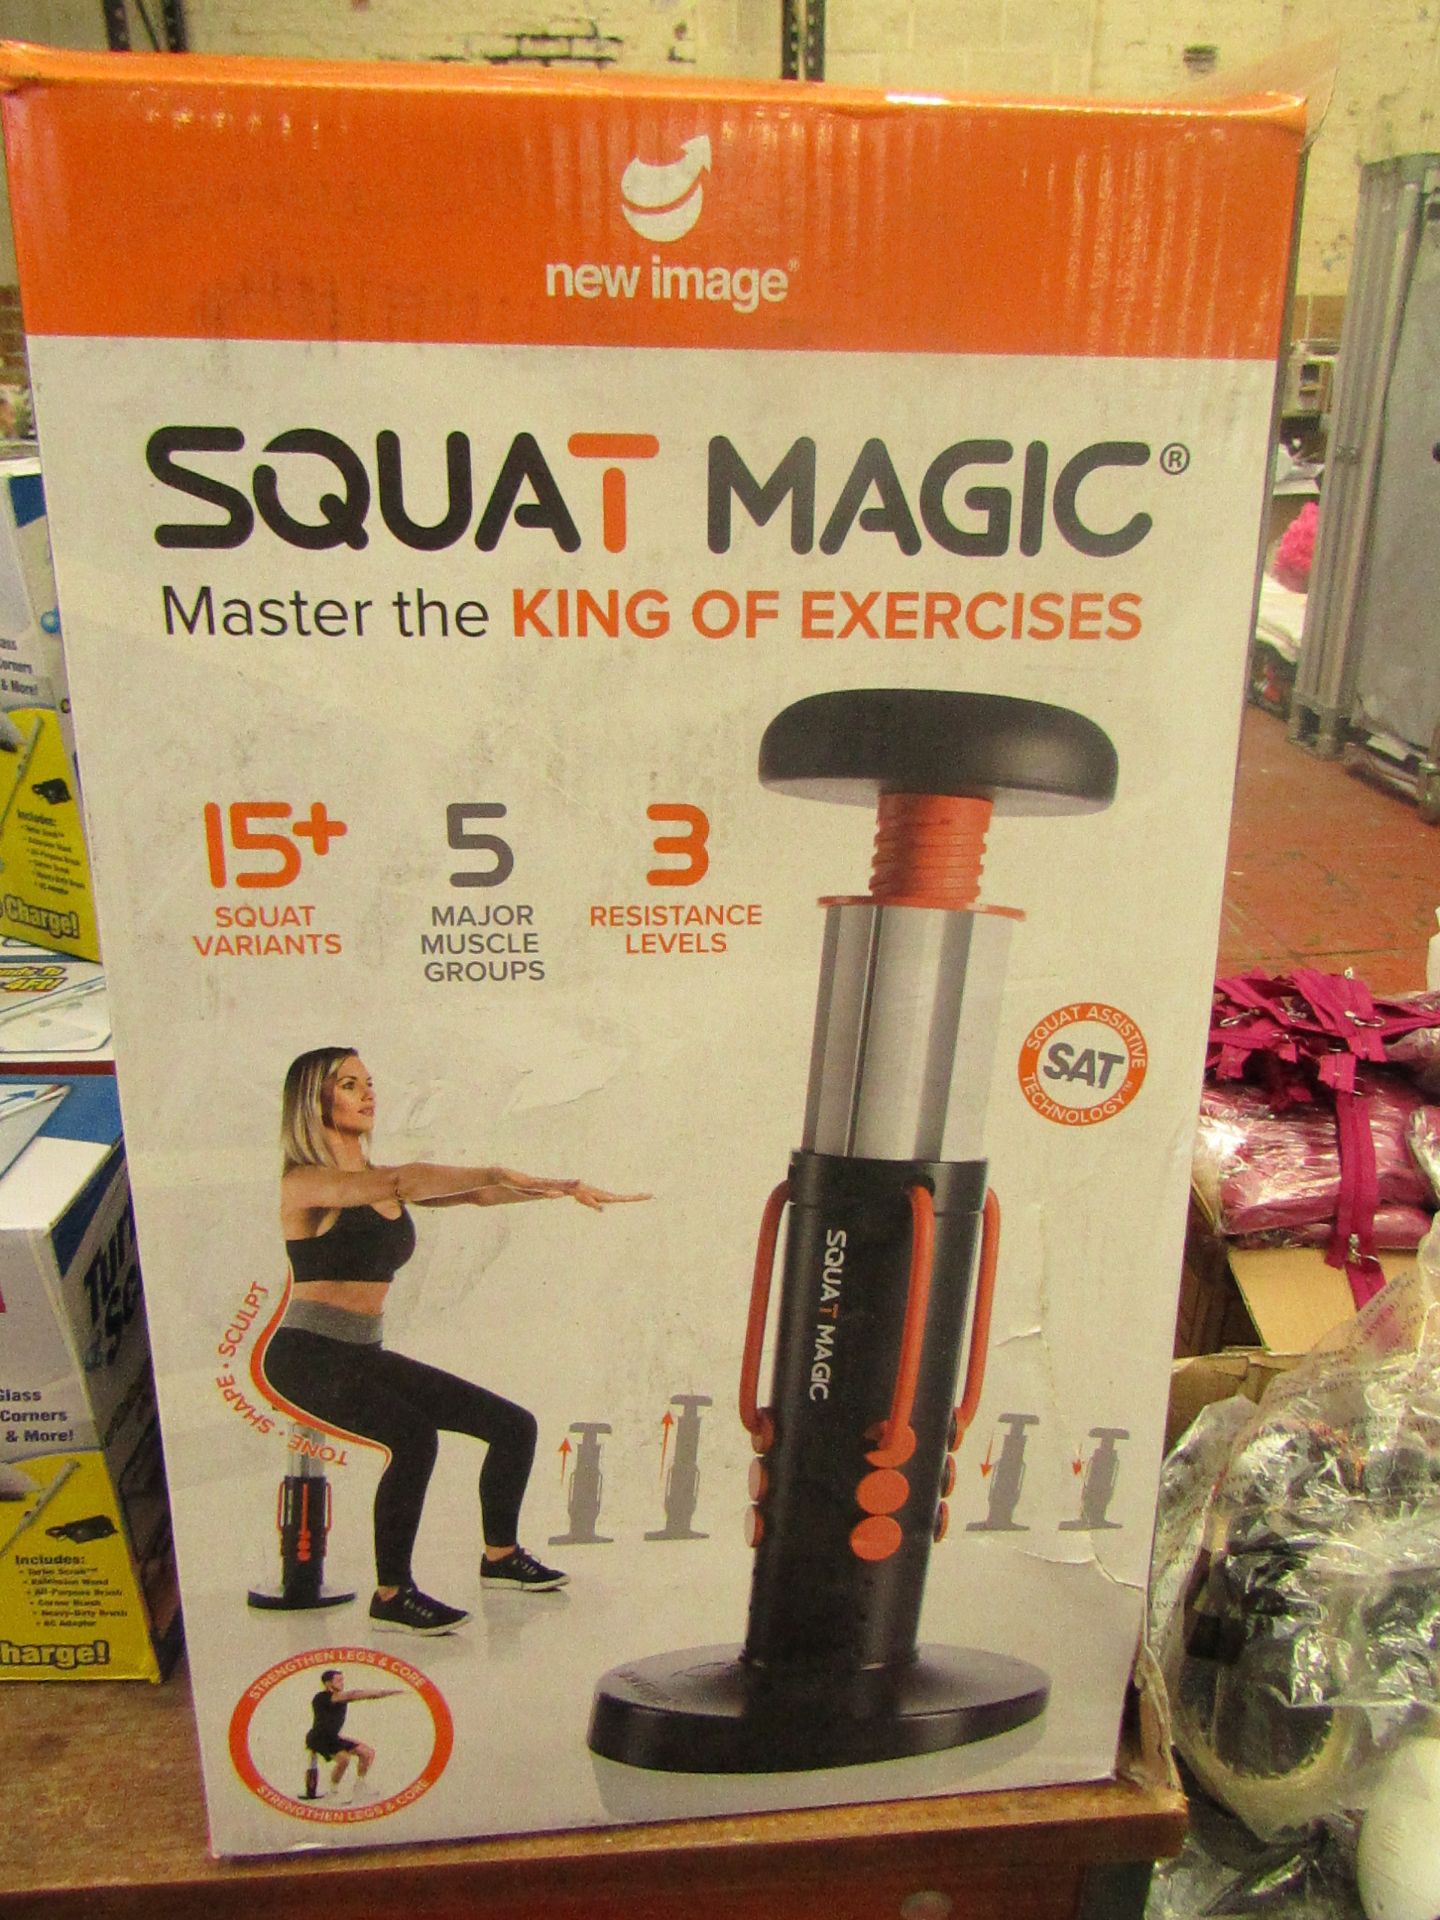 | 1x | New Image Squat Magic | Untested and boxed | no online re-sale | SKU - | RRP £59.99 |